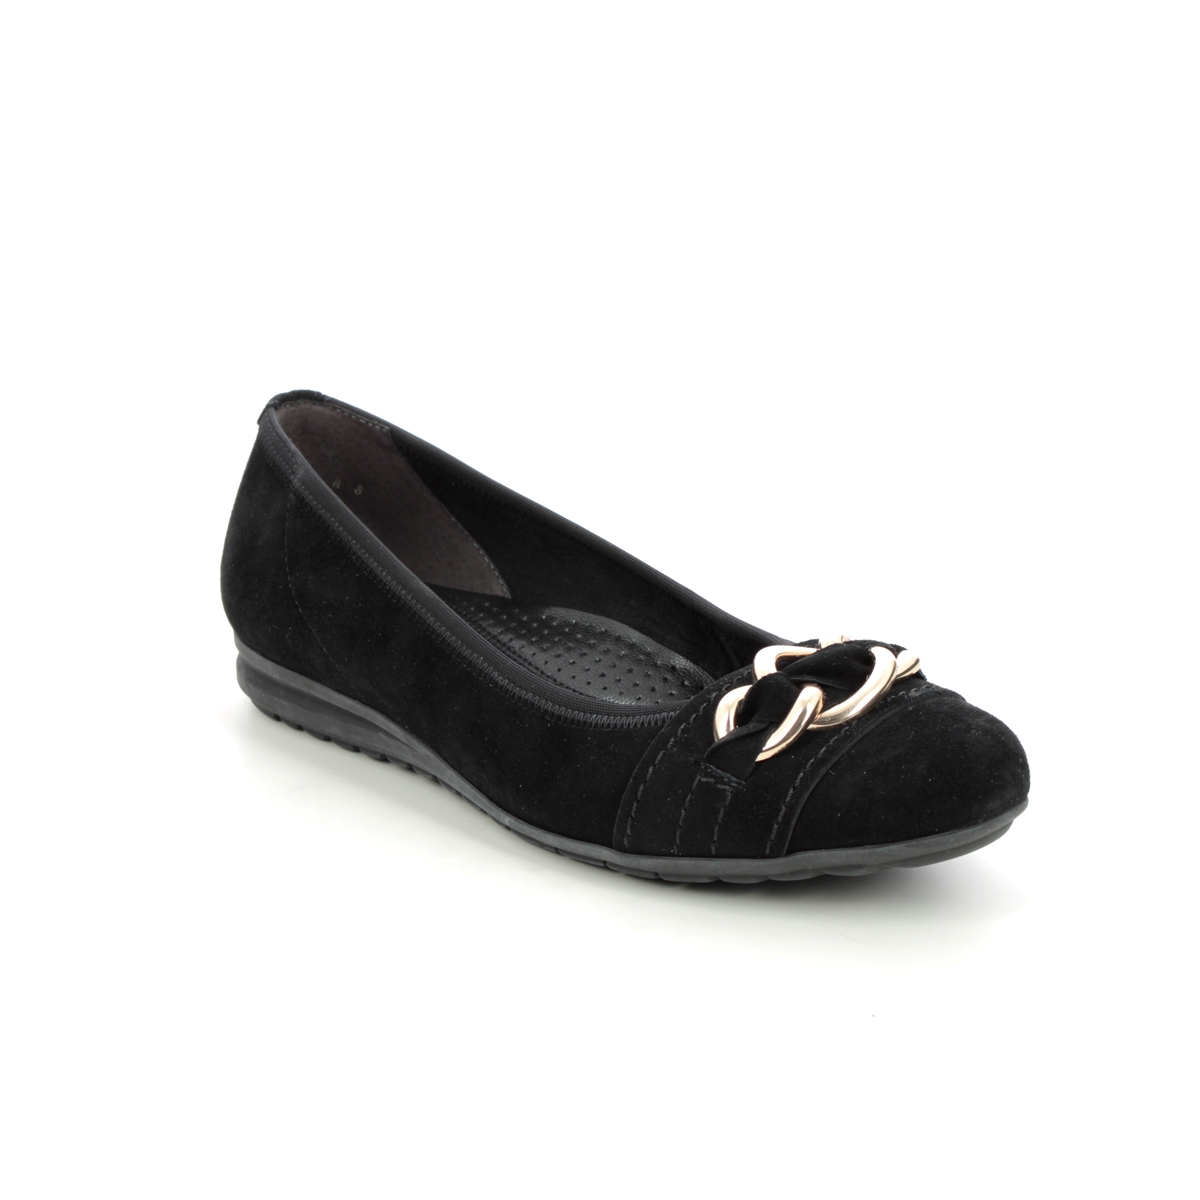 Gabor Sigrid Snug Black Suede Womens pumps 92.623.47 in a Plain Leather in Size 3